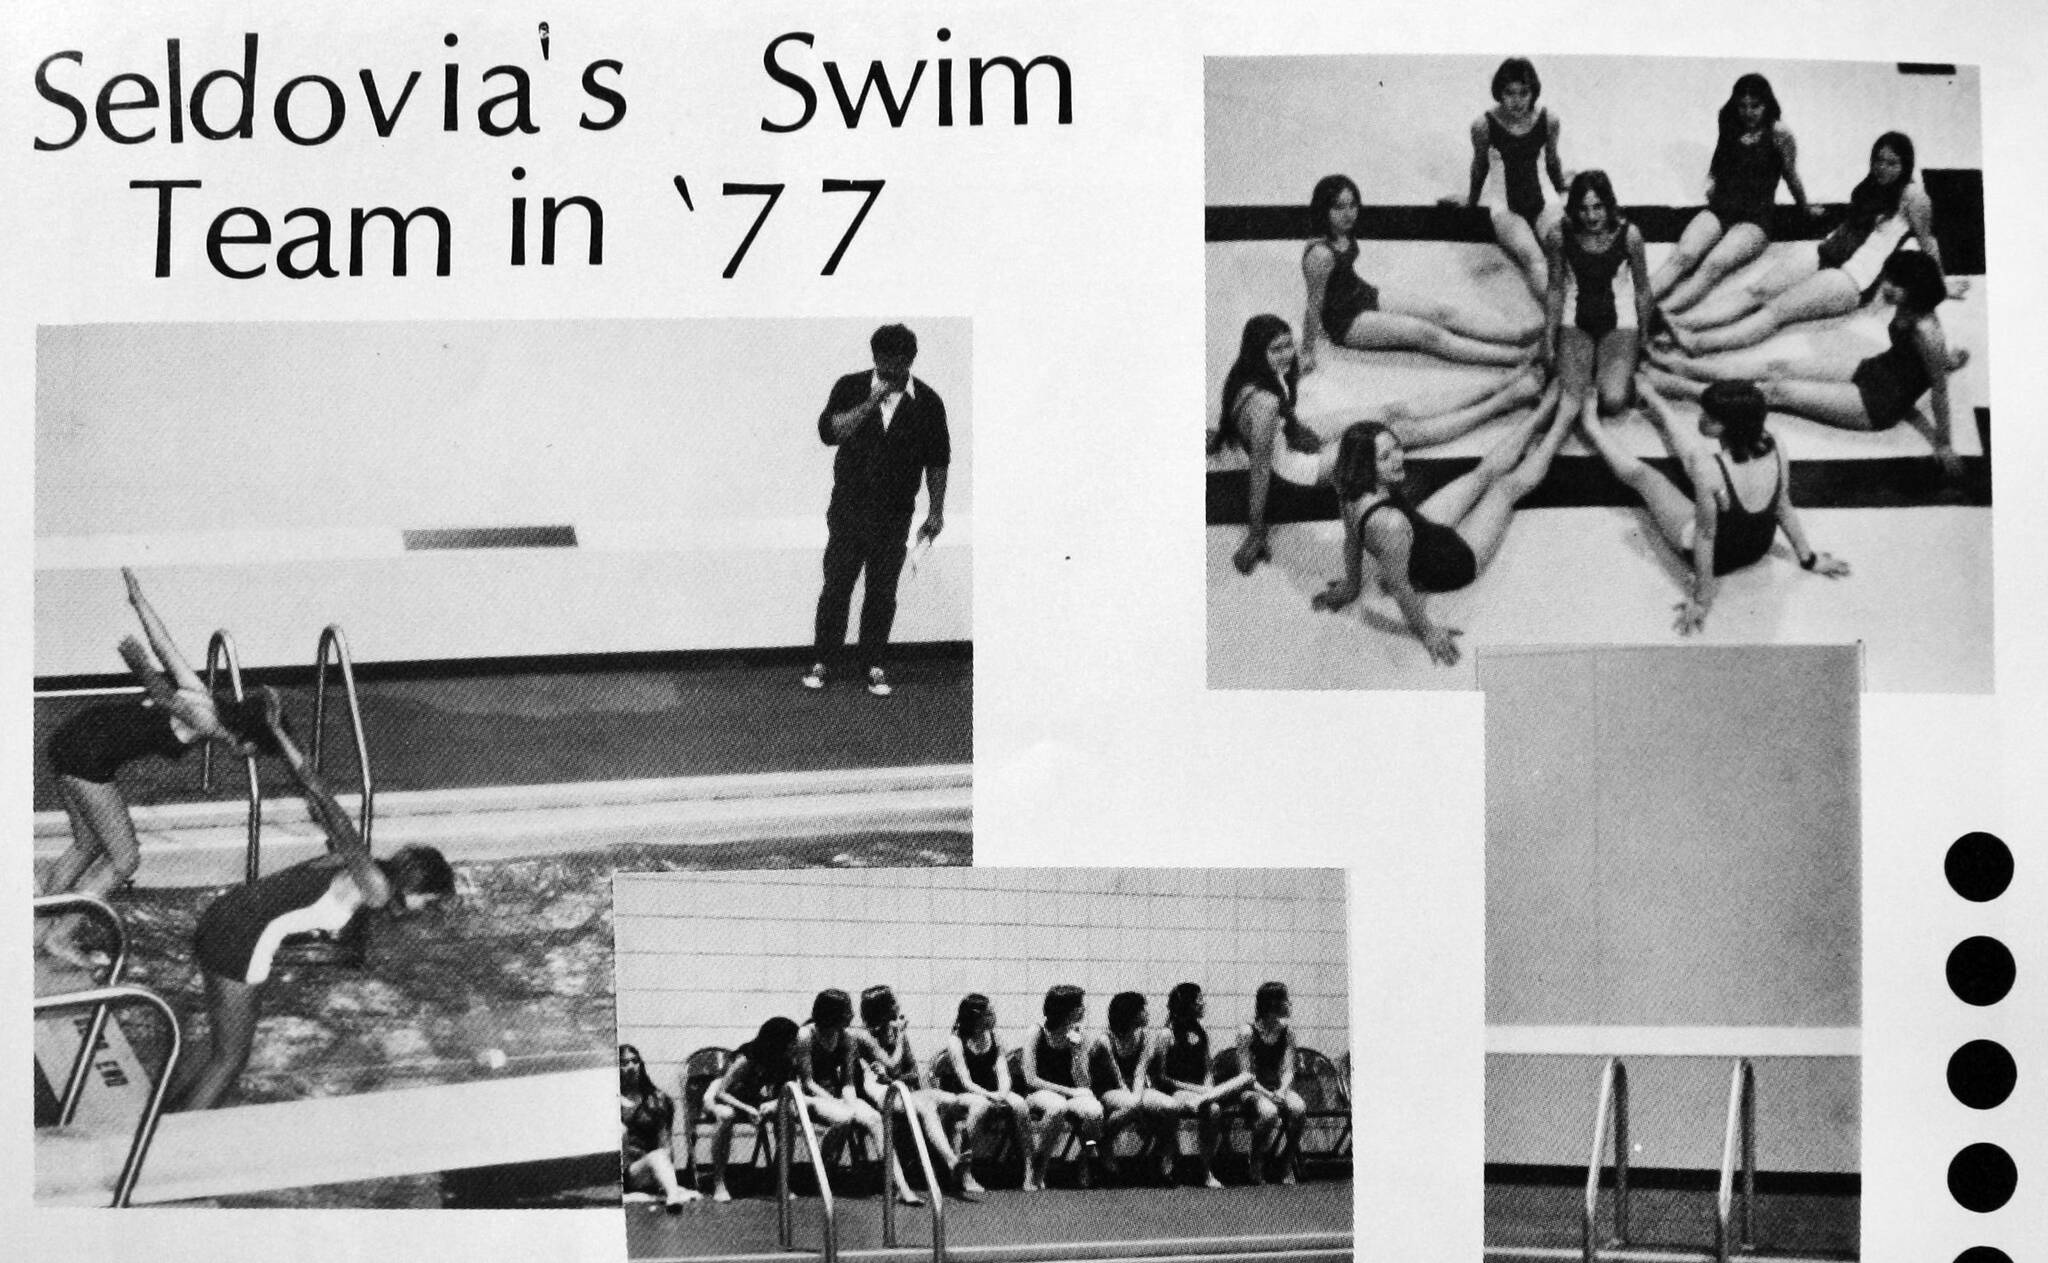 This is a portion of the swim team page from the 1977 Seldovia Otters yearbook. Rex Edwards can be seen poolside in the upper-left photo. (Image courtesy of Rex and Beverly Edwards)